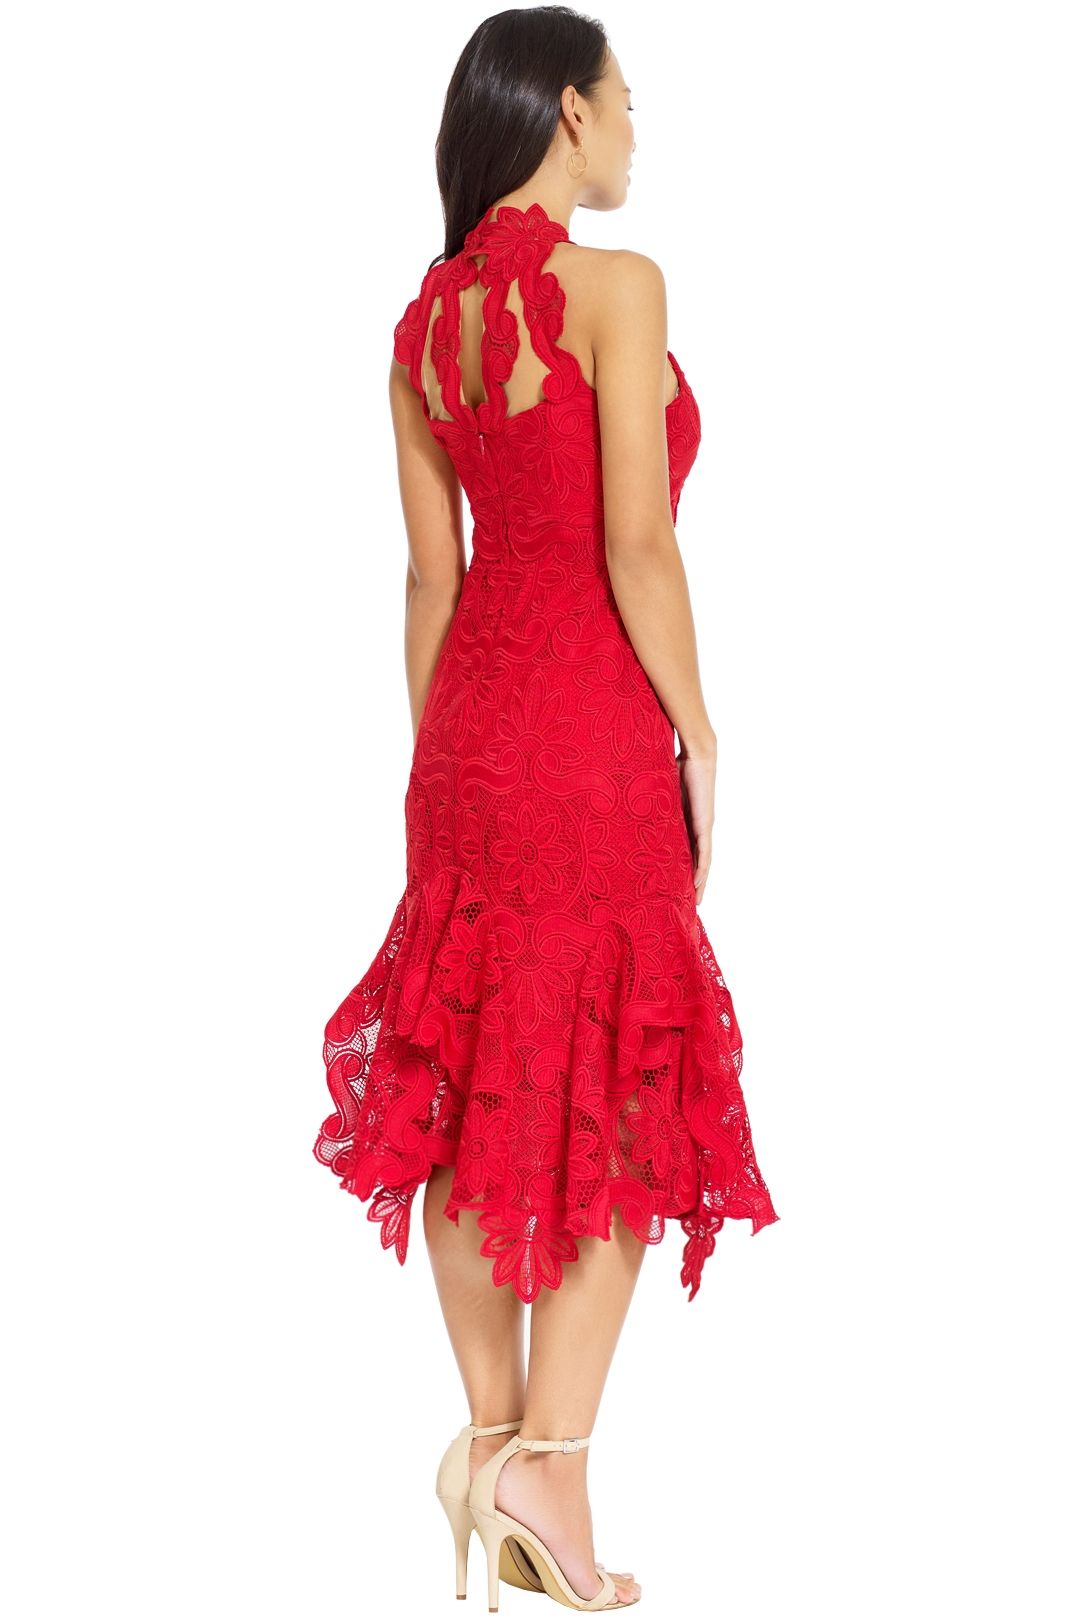 Thurley - Waterlilly Midi Dress - Red - Back